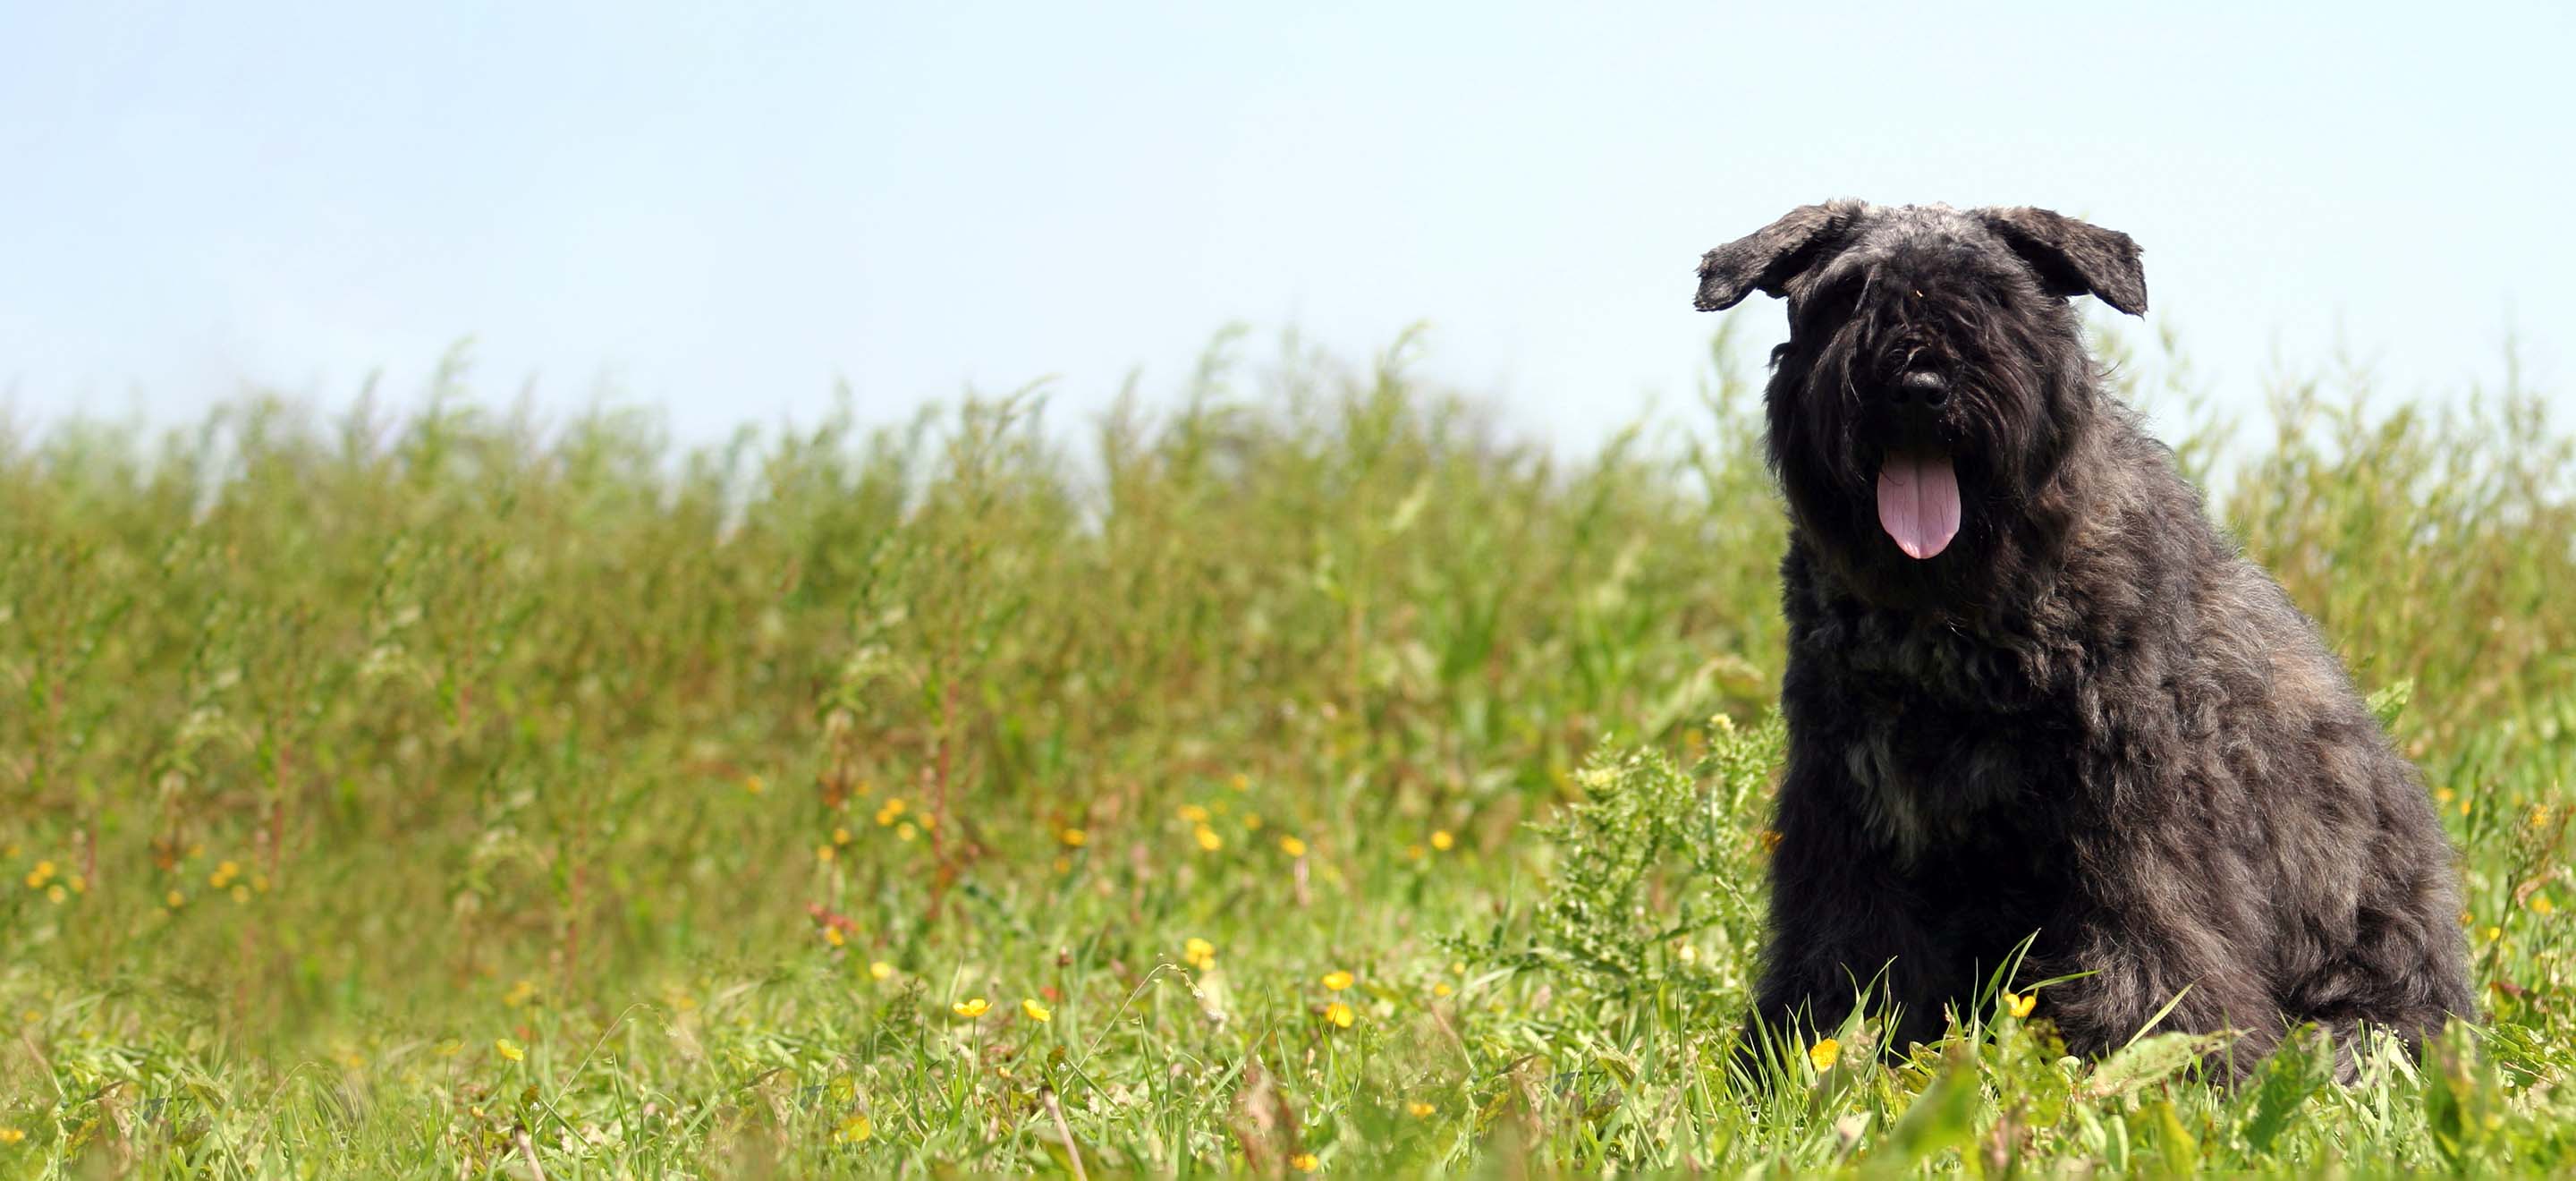 A Bouvier Des Flandres dog standing in a tall grass field image